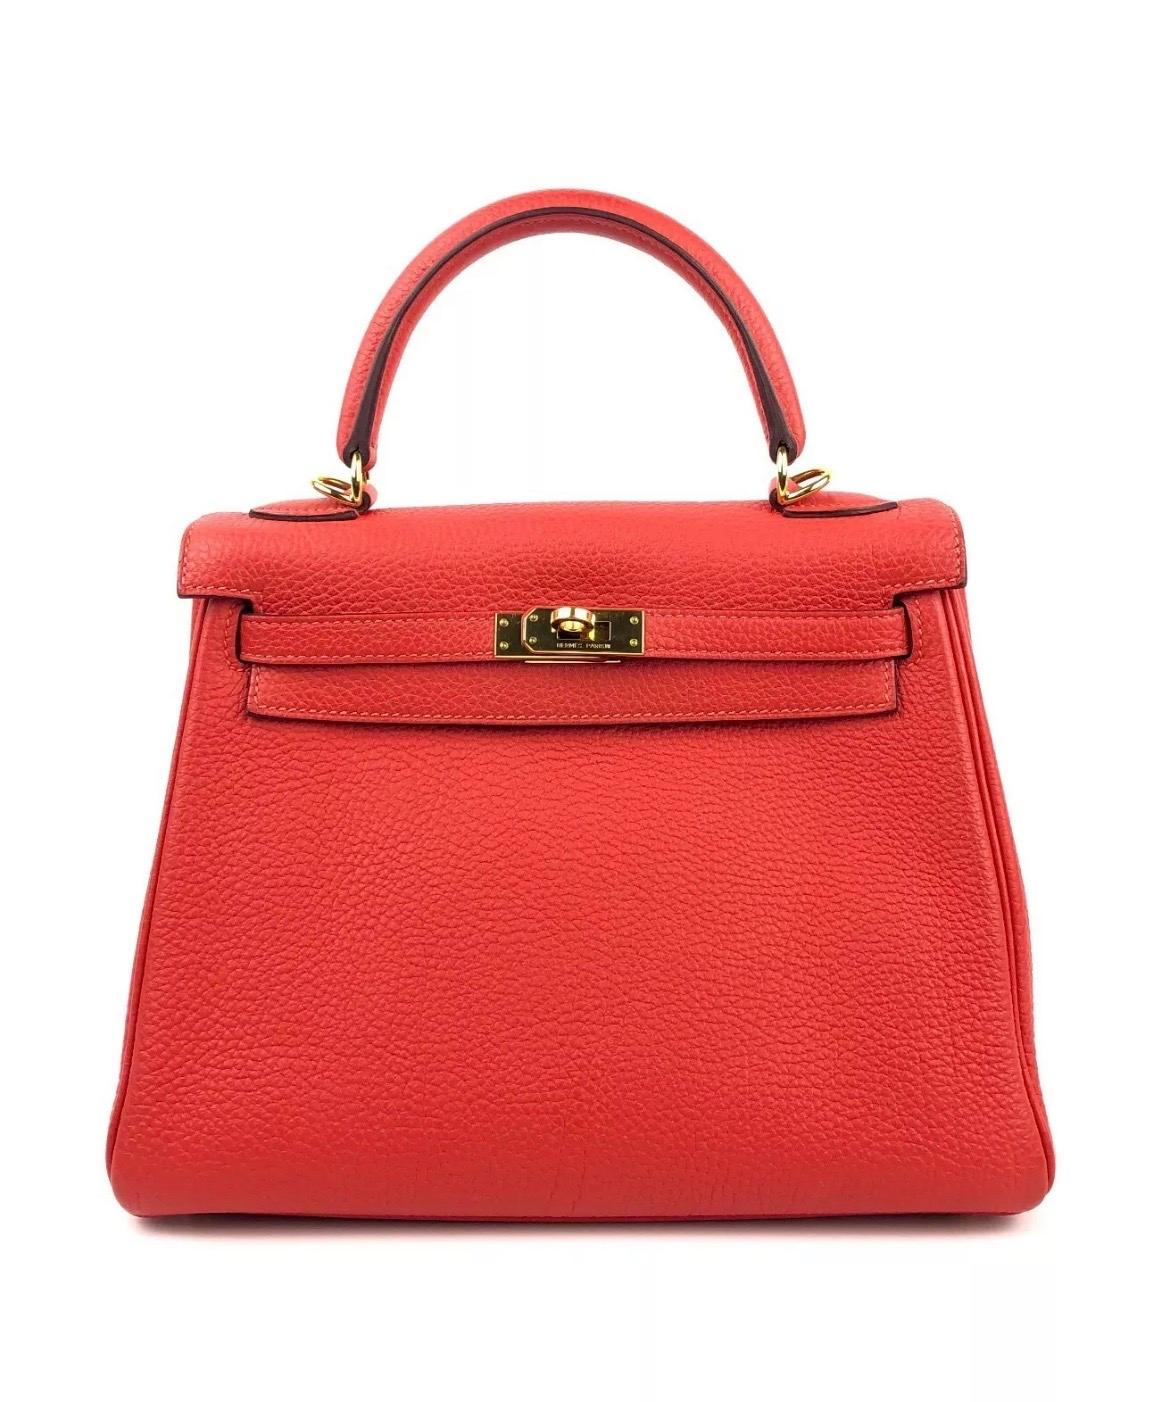 Hermes Birkin 25 Bougainvillea Red Pink W/ Gold Hardware. 2015 T STAMP. Excellent Condition, excellent corners and structure. 

Shop with confidence from Lux Addicts. Authenticity guaranteed